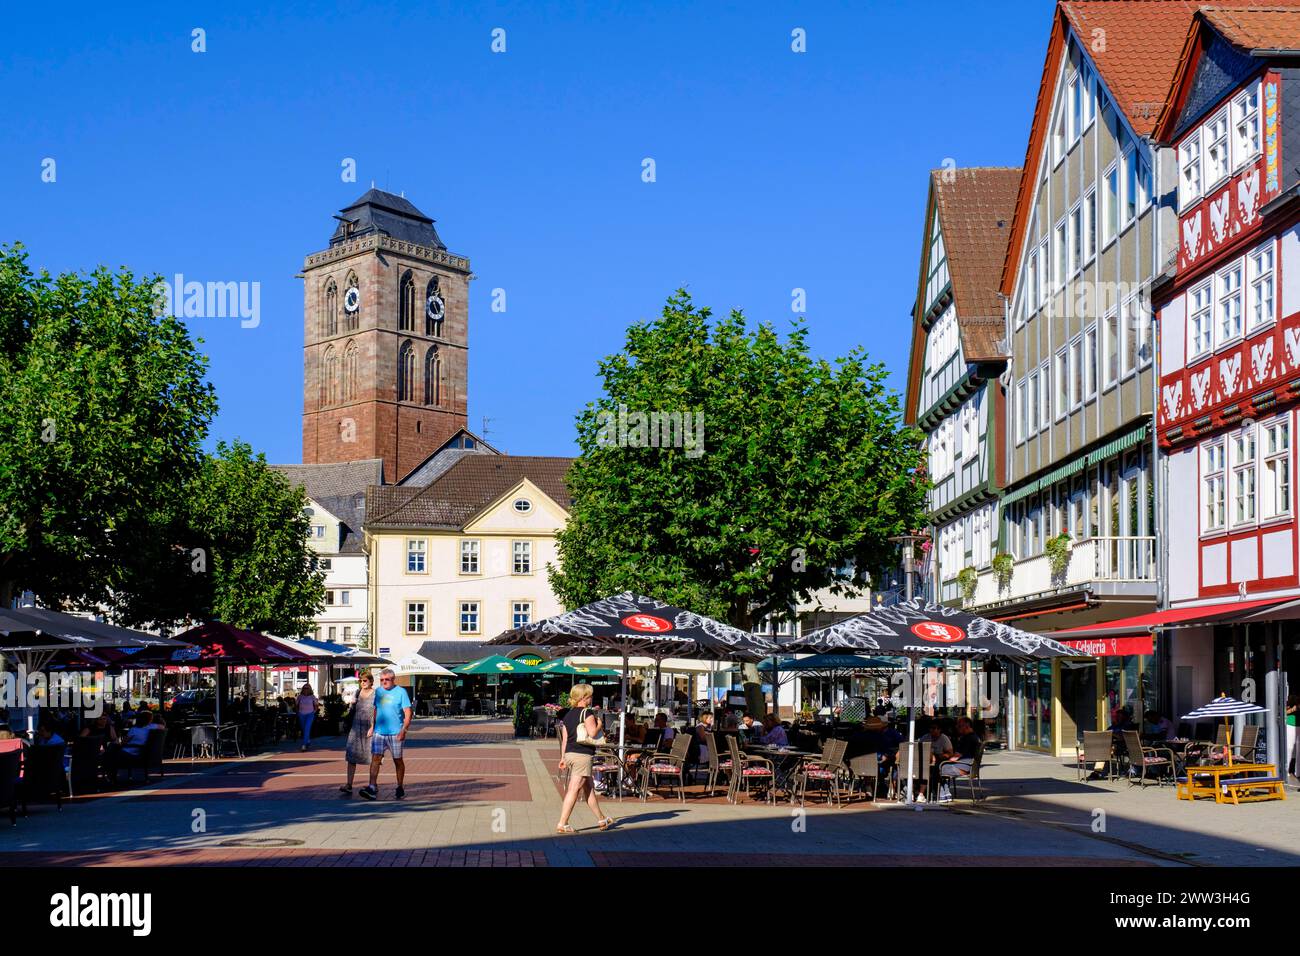 Pedestrian zone with restaurant and street cafe, Linggplatz, bell tower of the Gothic town church, Old Town, Bad Hersfeld, Hesse, Germany Stock Photo